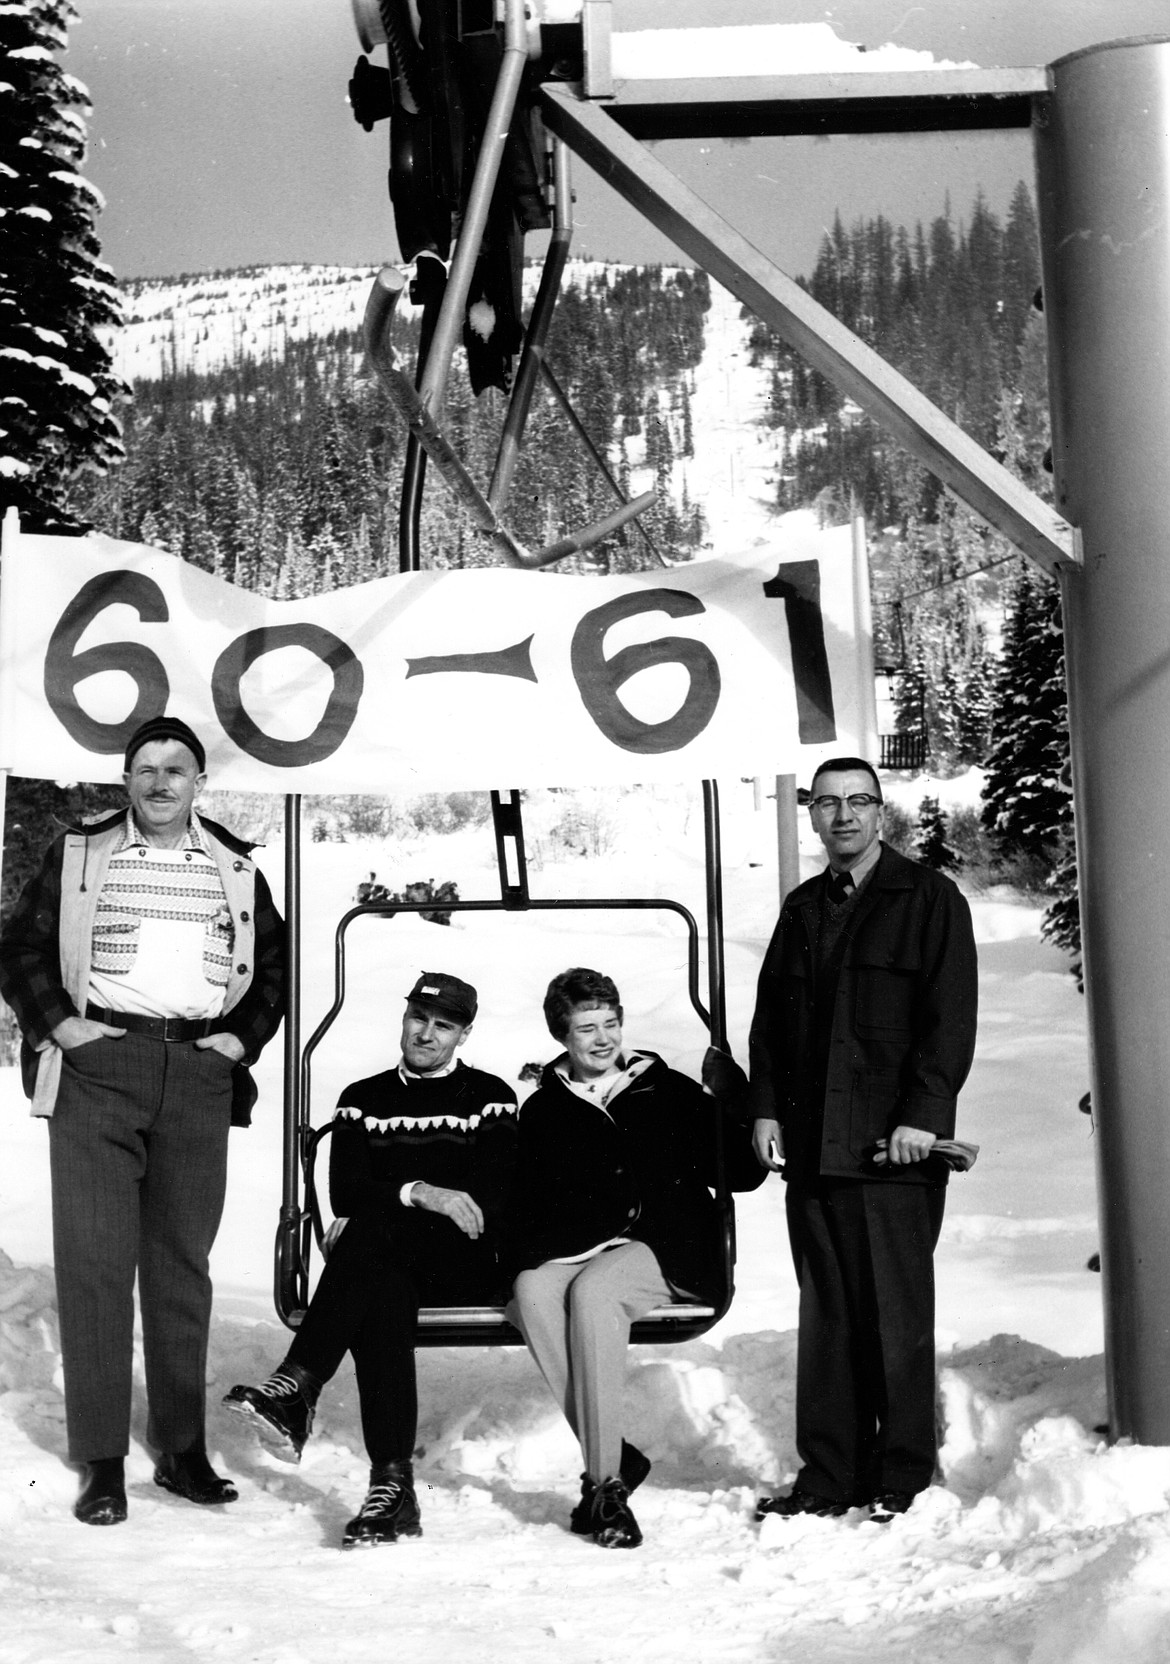 Chair 1 at The Big Mountain opens in 1960. (Photo courtesy of Flathead Valley Ski Education Foundation)